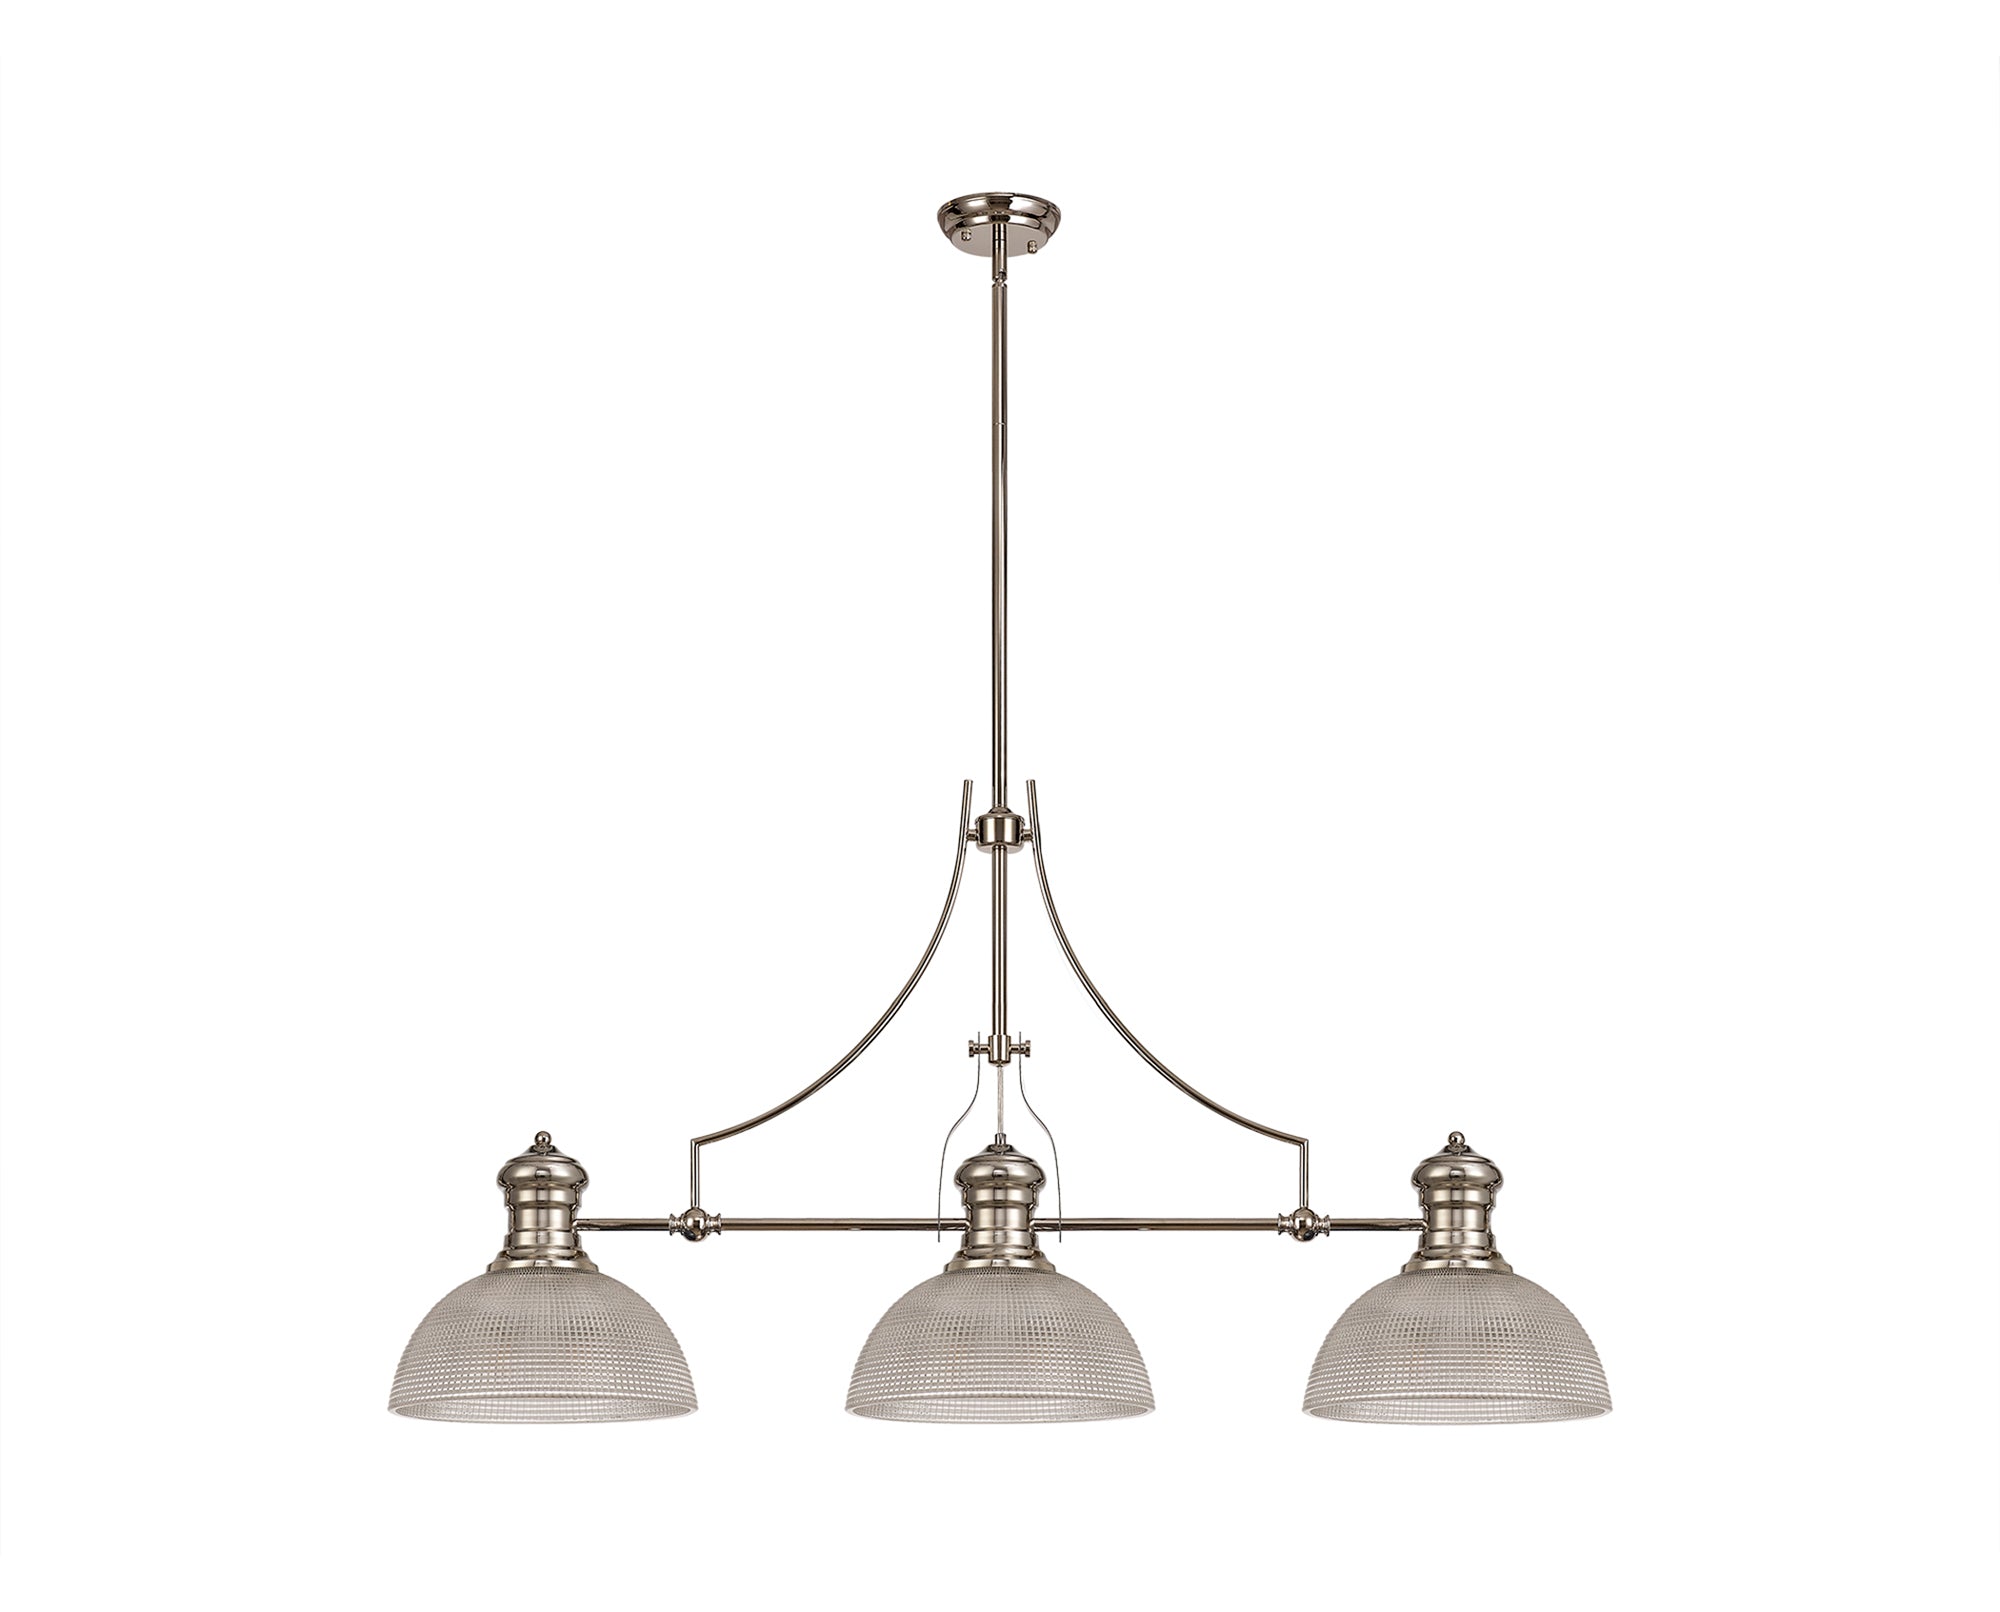 Docker 3 Light Linear Pendant E27 With 30cm Prismatic Glass Shade, Polished Nickel, Clear